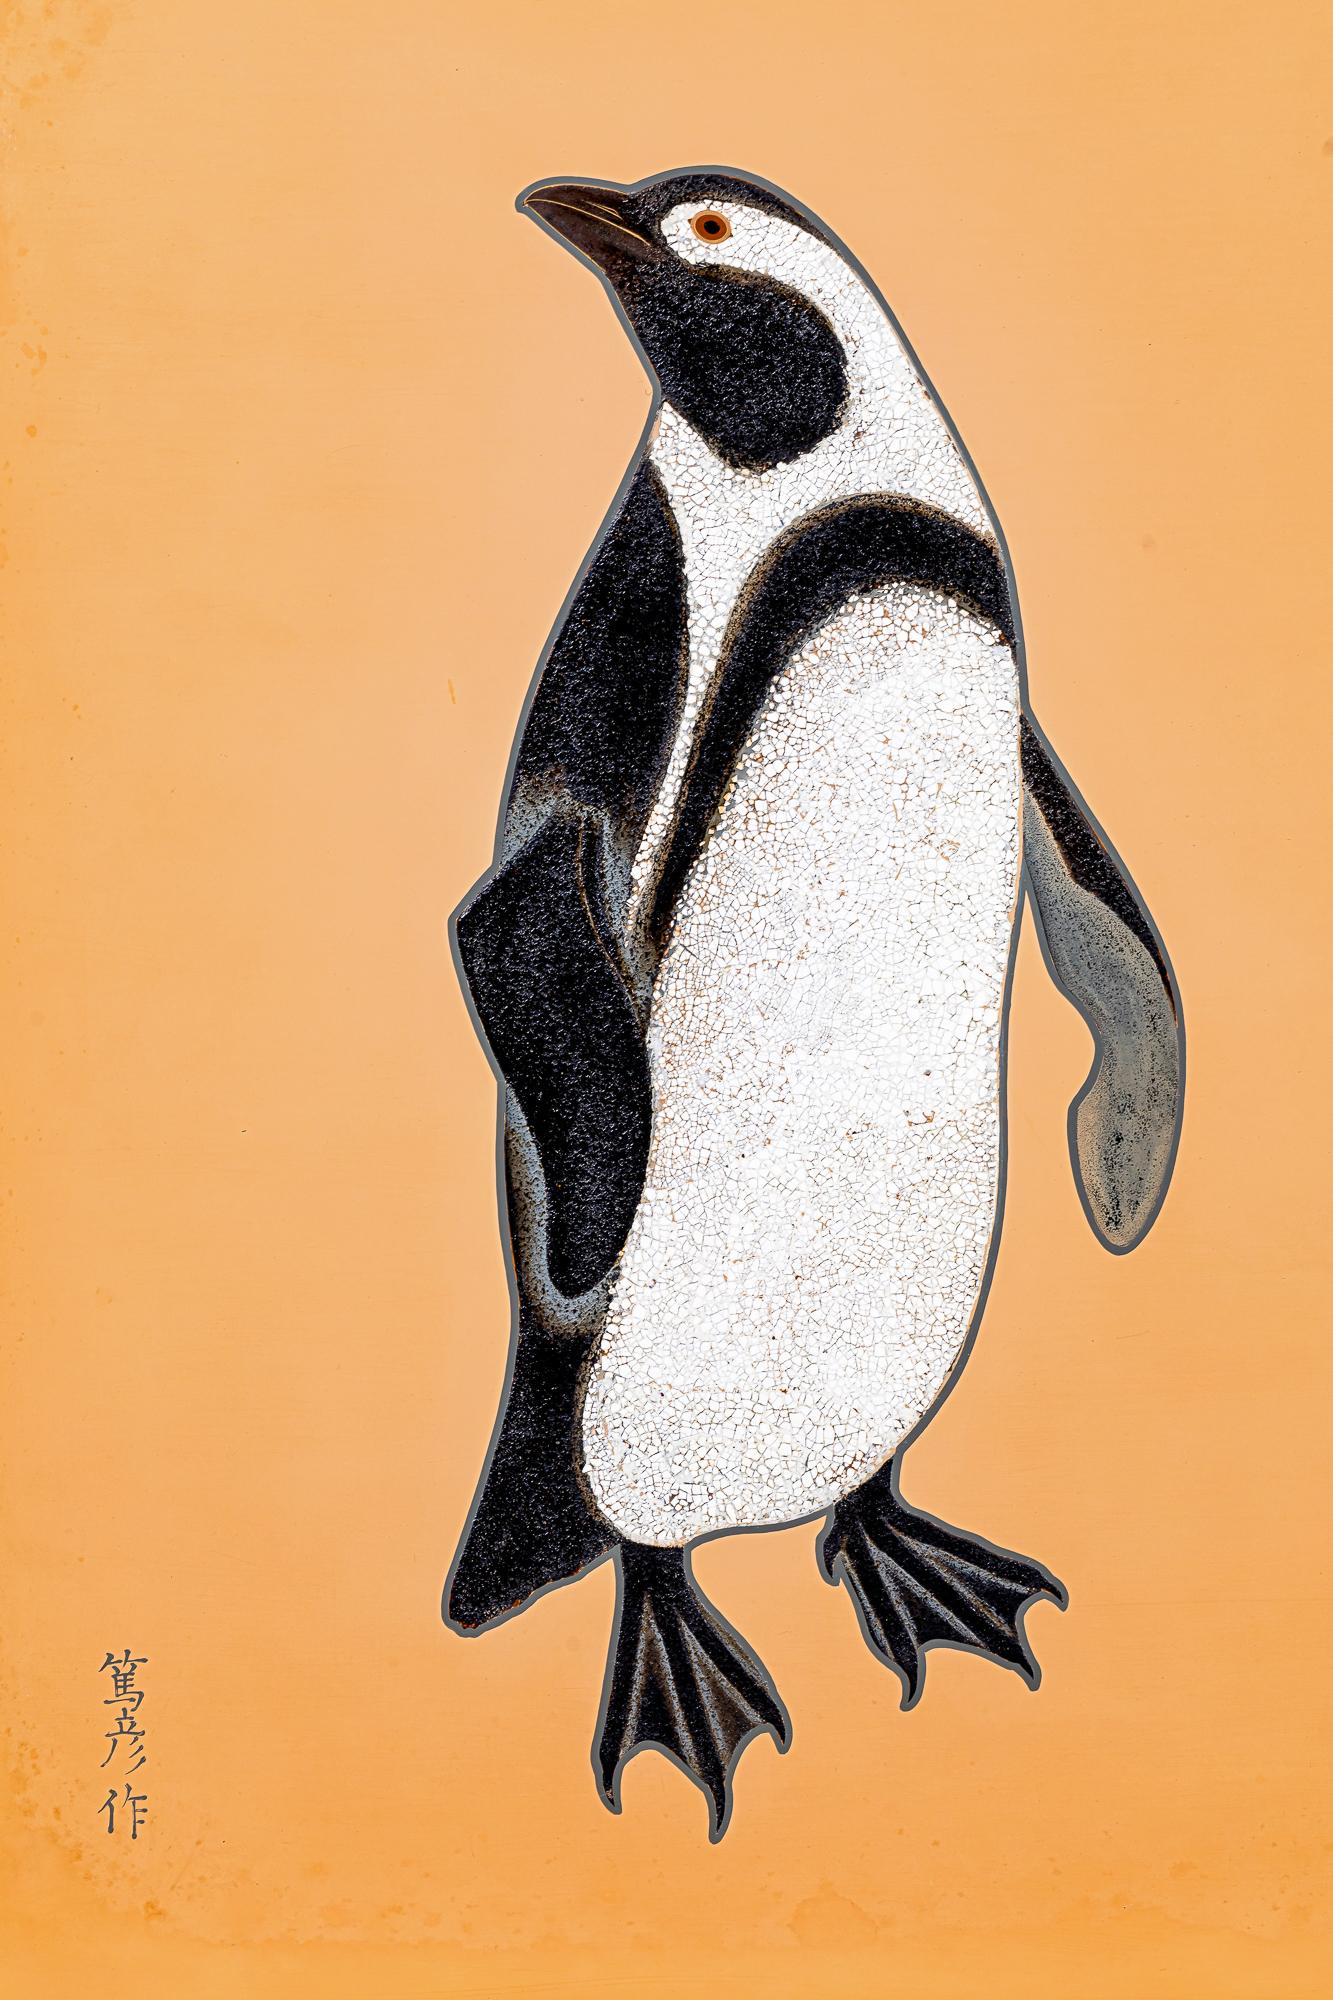 Beige ground lacquer with black and grey lacquer penguins with small pieces of shell making up white areas.  Lacquer on wood. Writing reads: Lacquer Screen By Izumi Atsuhiko. It was shown in the National Nitten Exhibition 11 in 1955 (Showa 30). See